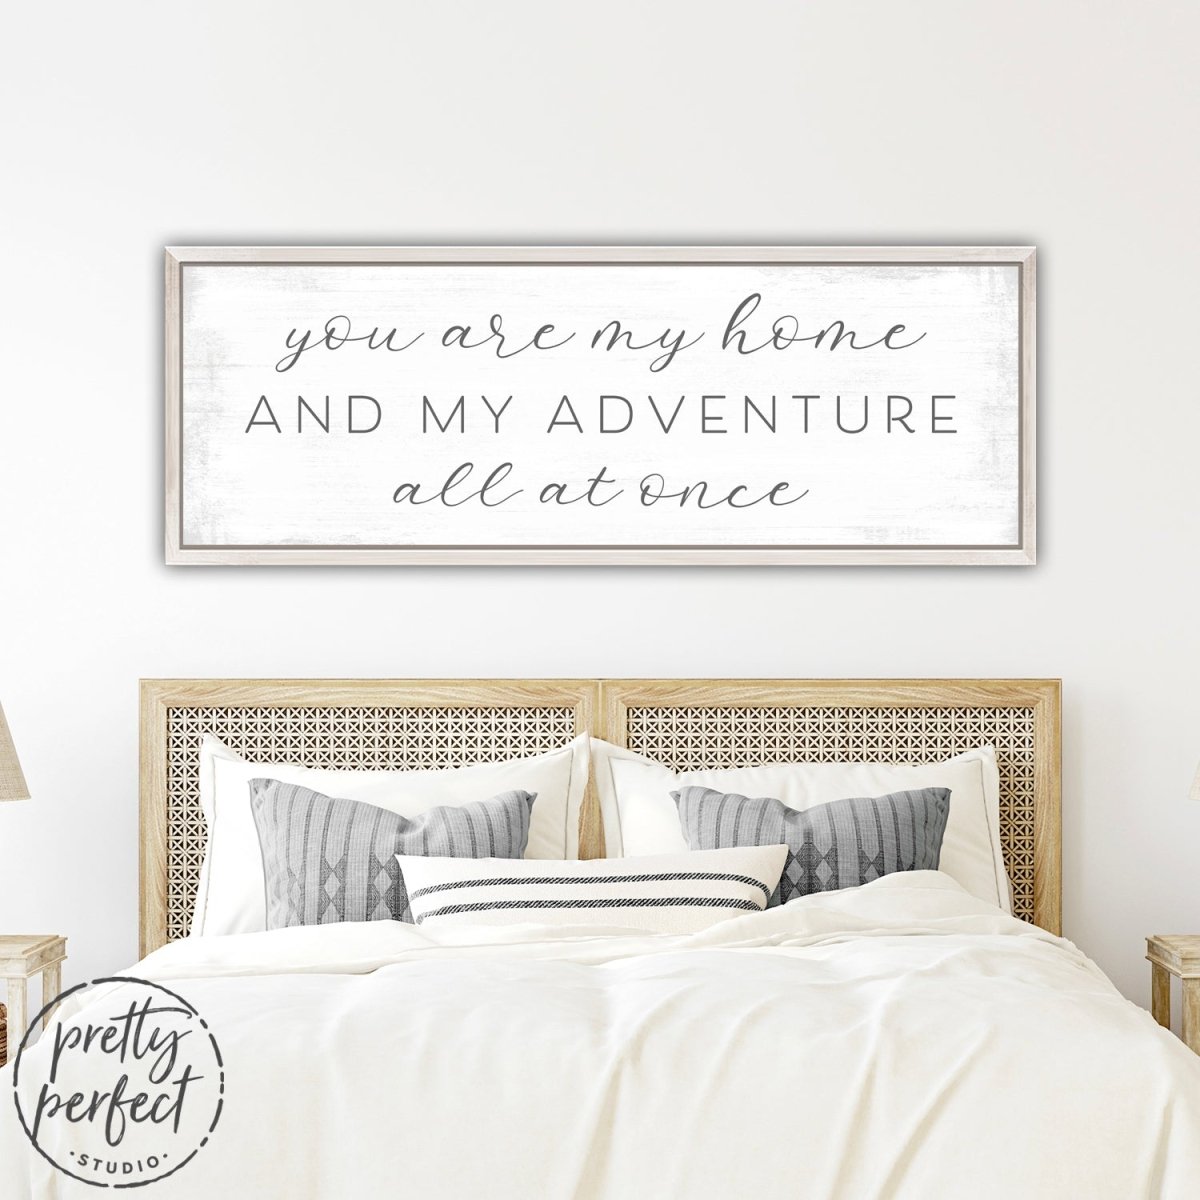 You Are My Home and My Adventure All at Once Sign Over Bed in Bedroom - Pretty Perfect Studio